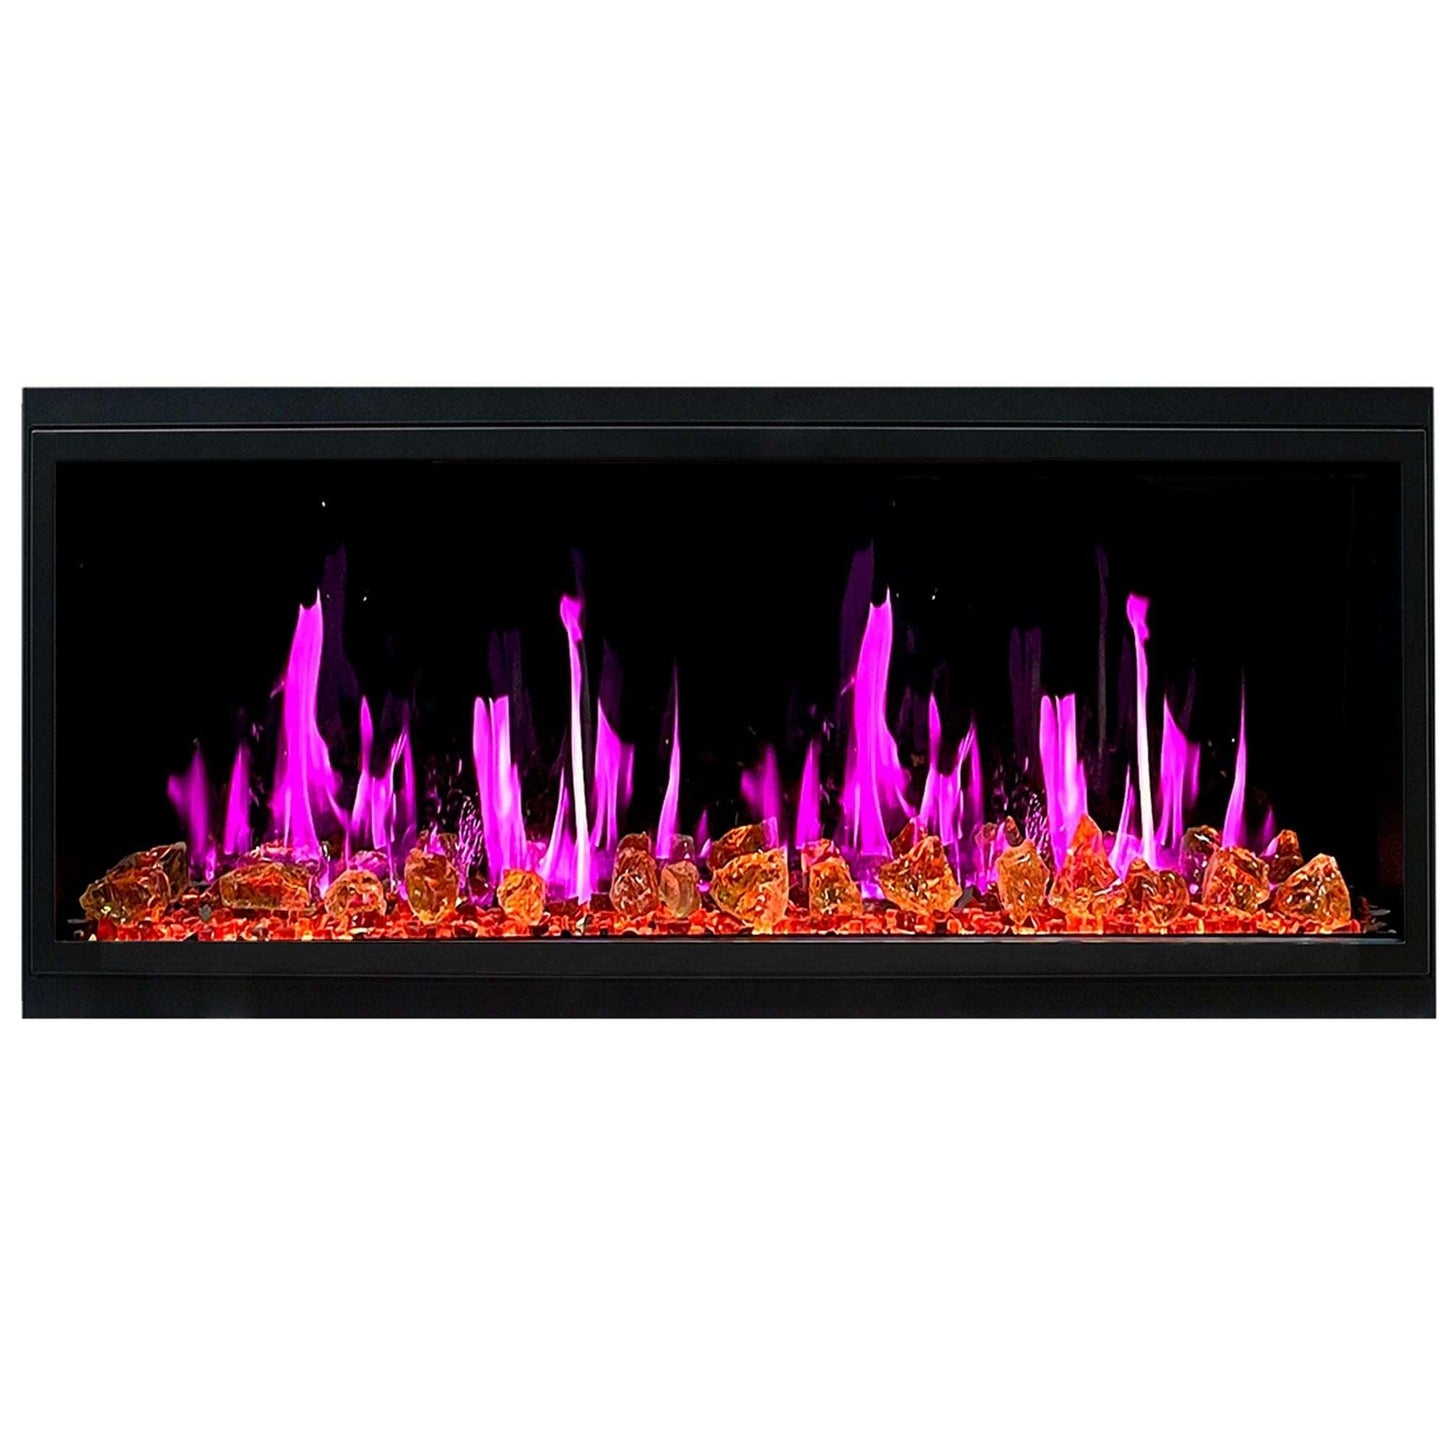 ZopaFlame™ 46" Linear Built-in Electric Fireplace - BG19455V - ZopaFlame Fireplaces